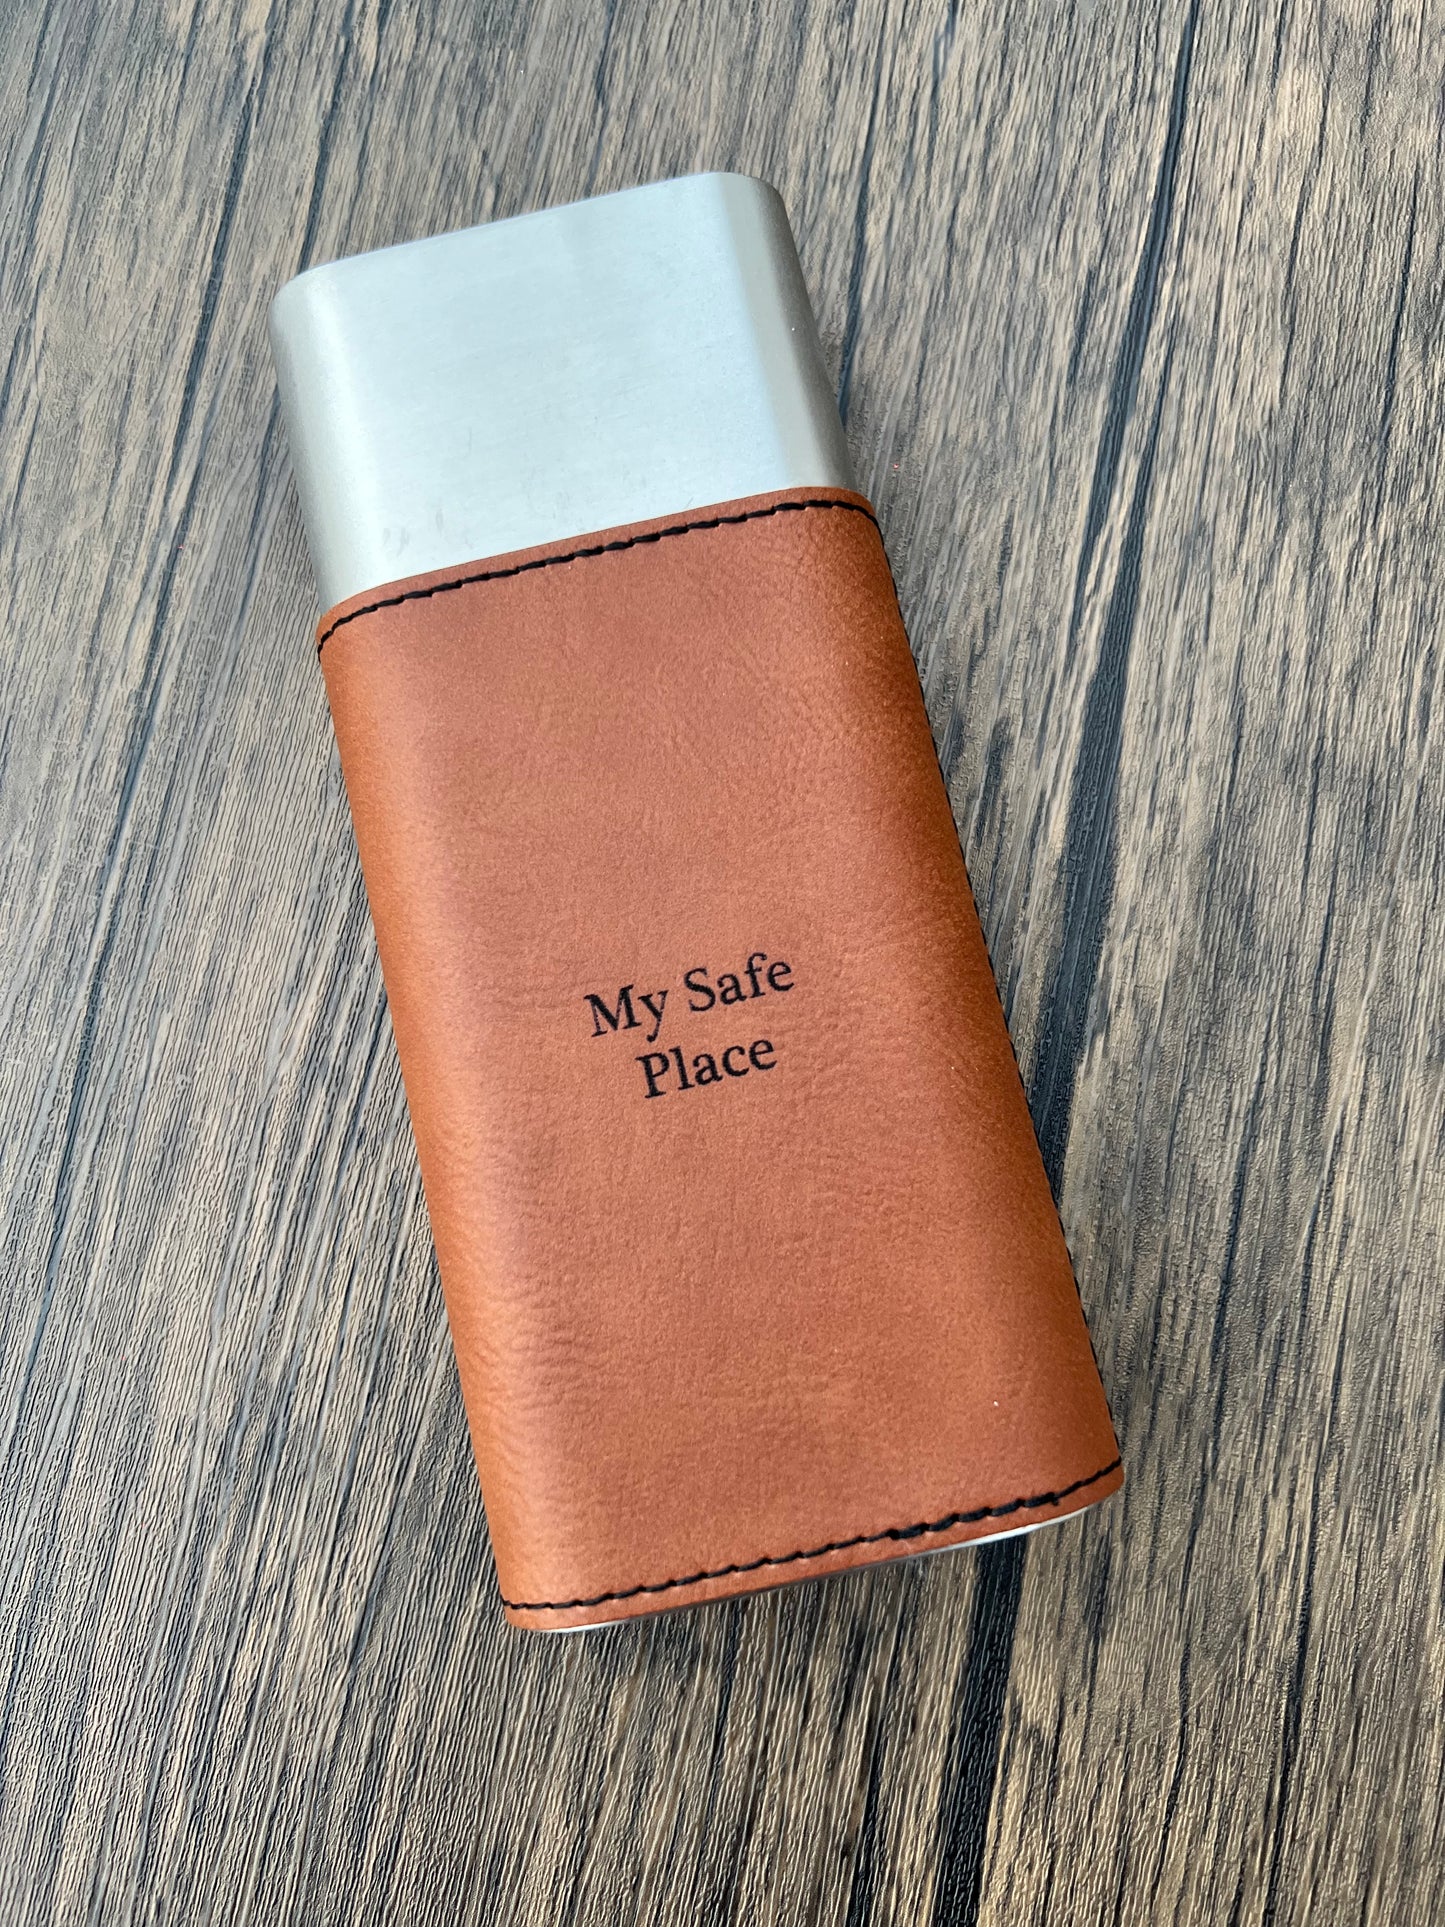 Personalized cigar case and cutter - custom engraved cigar case